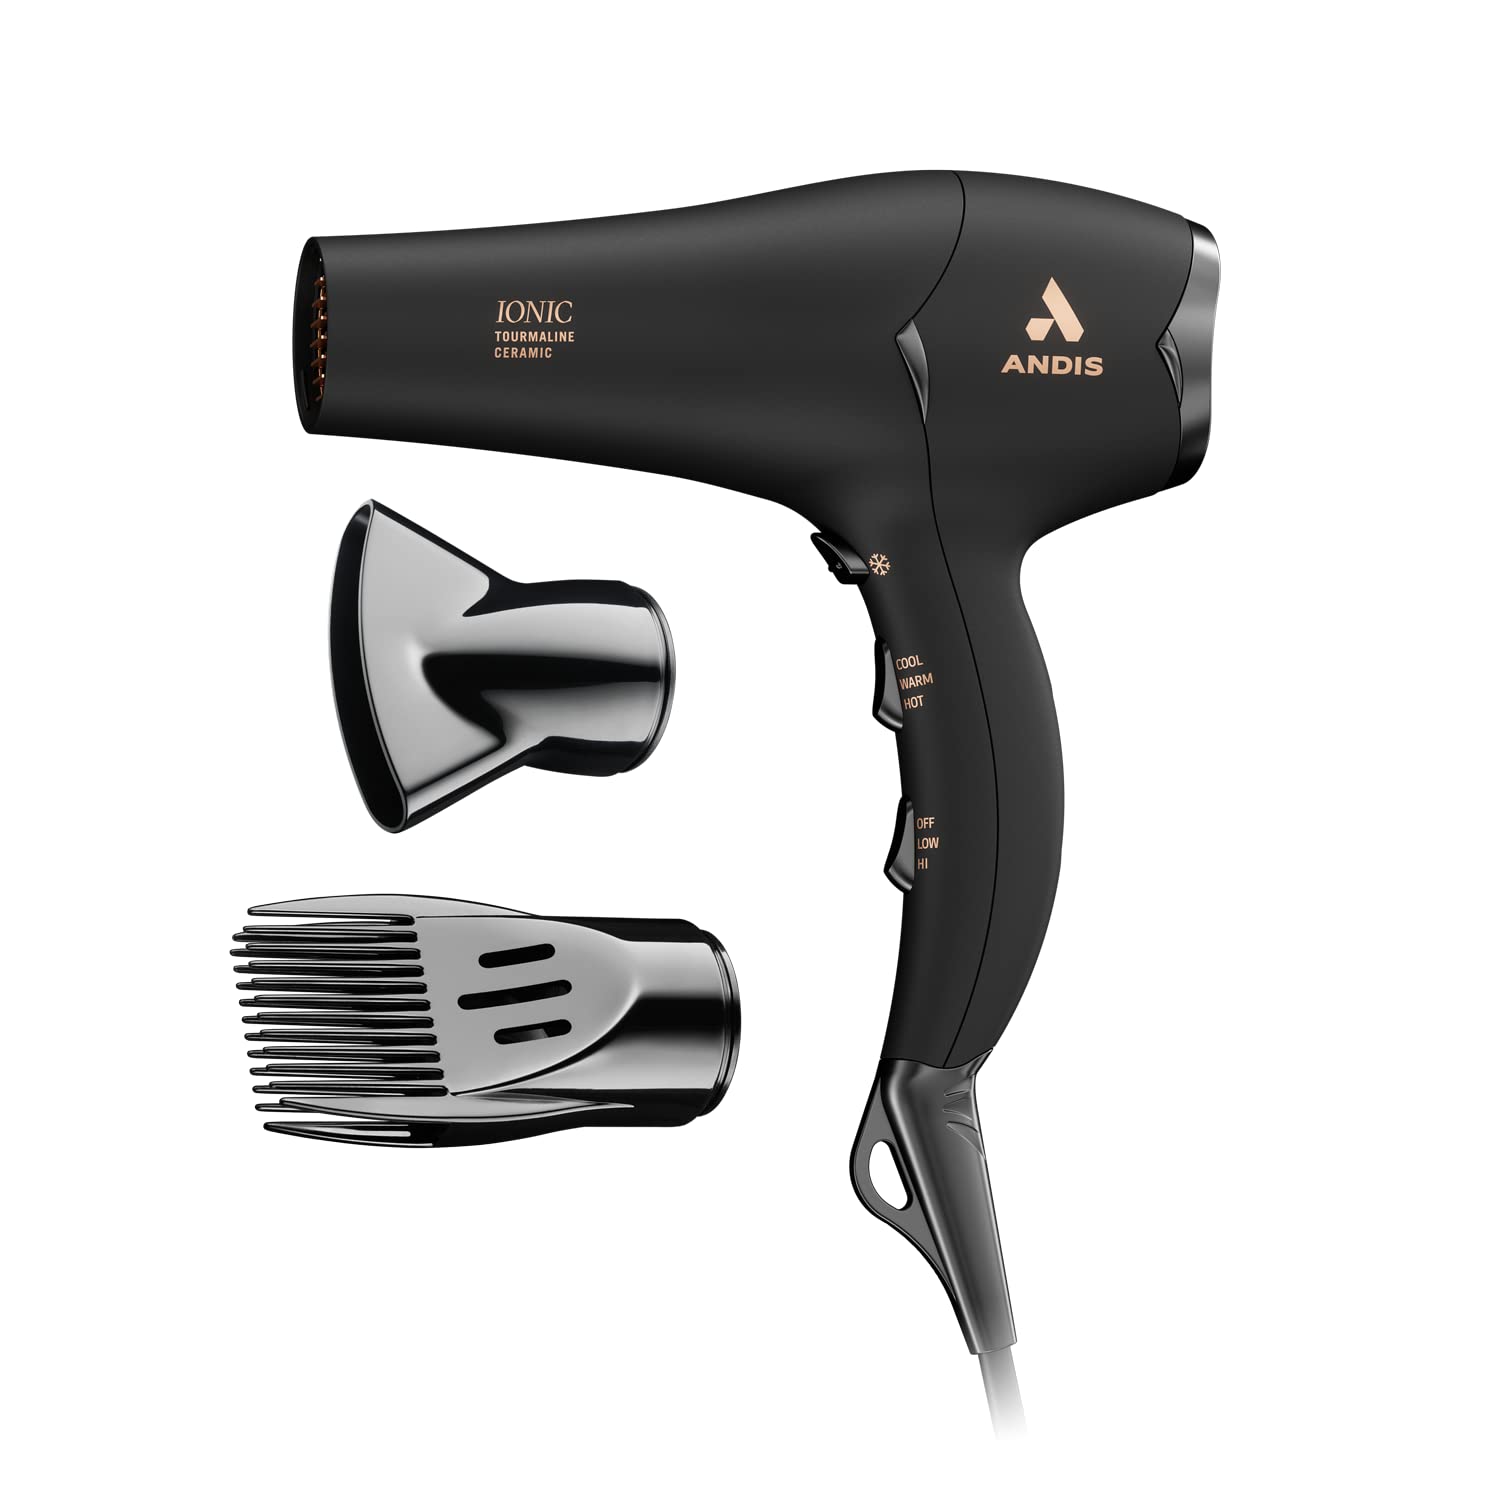 A black hair dryer with two brushes and one brush holder.